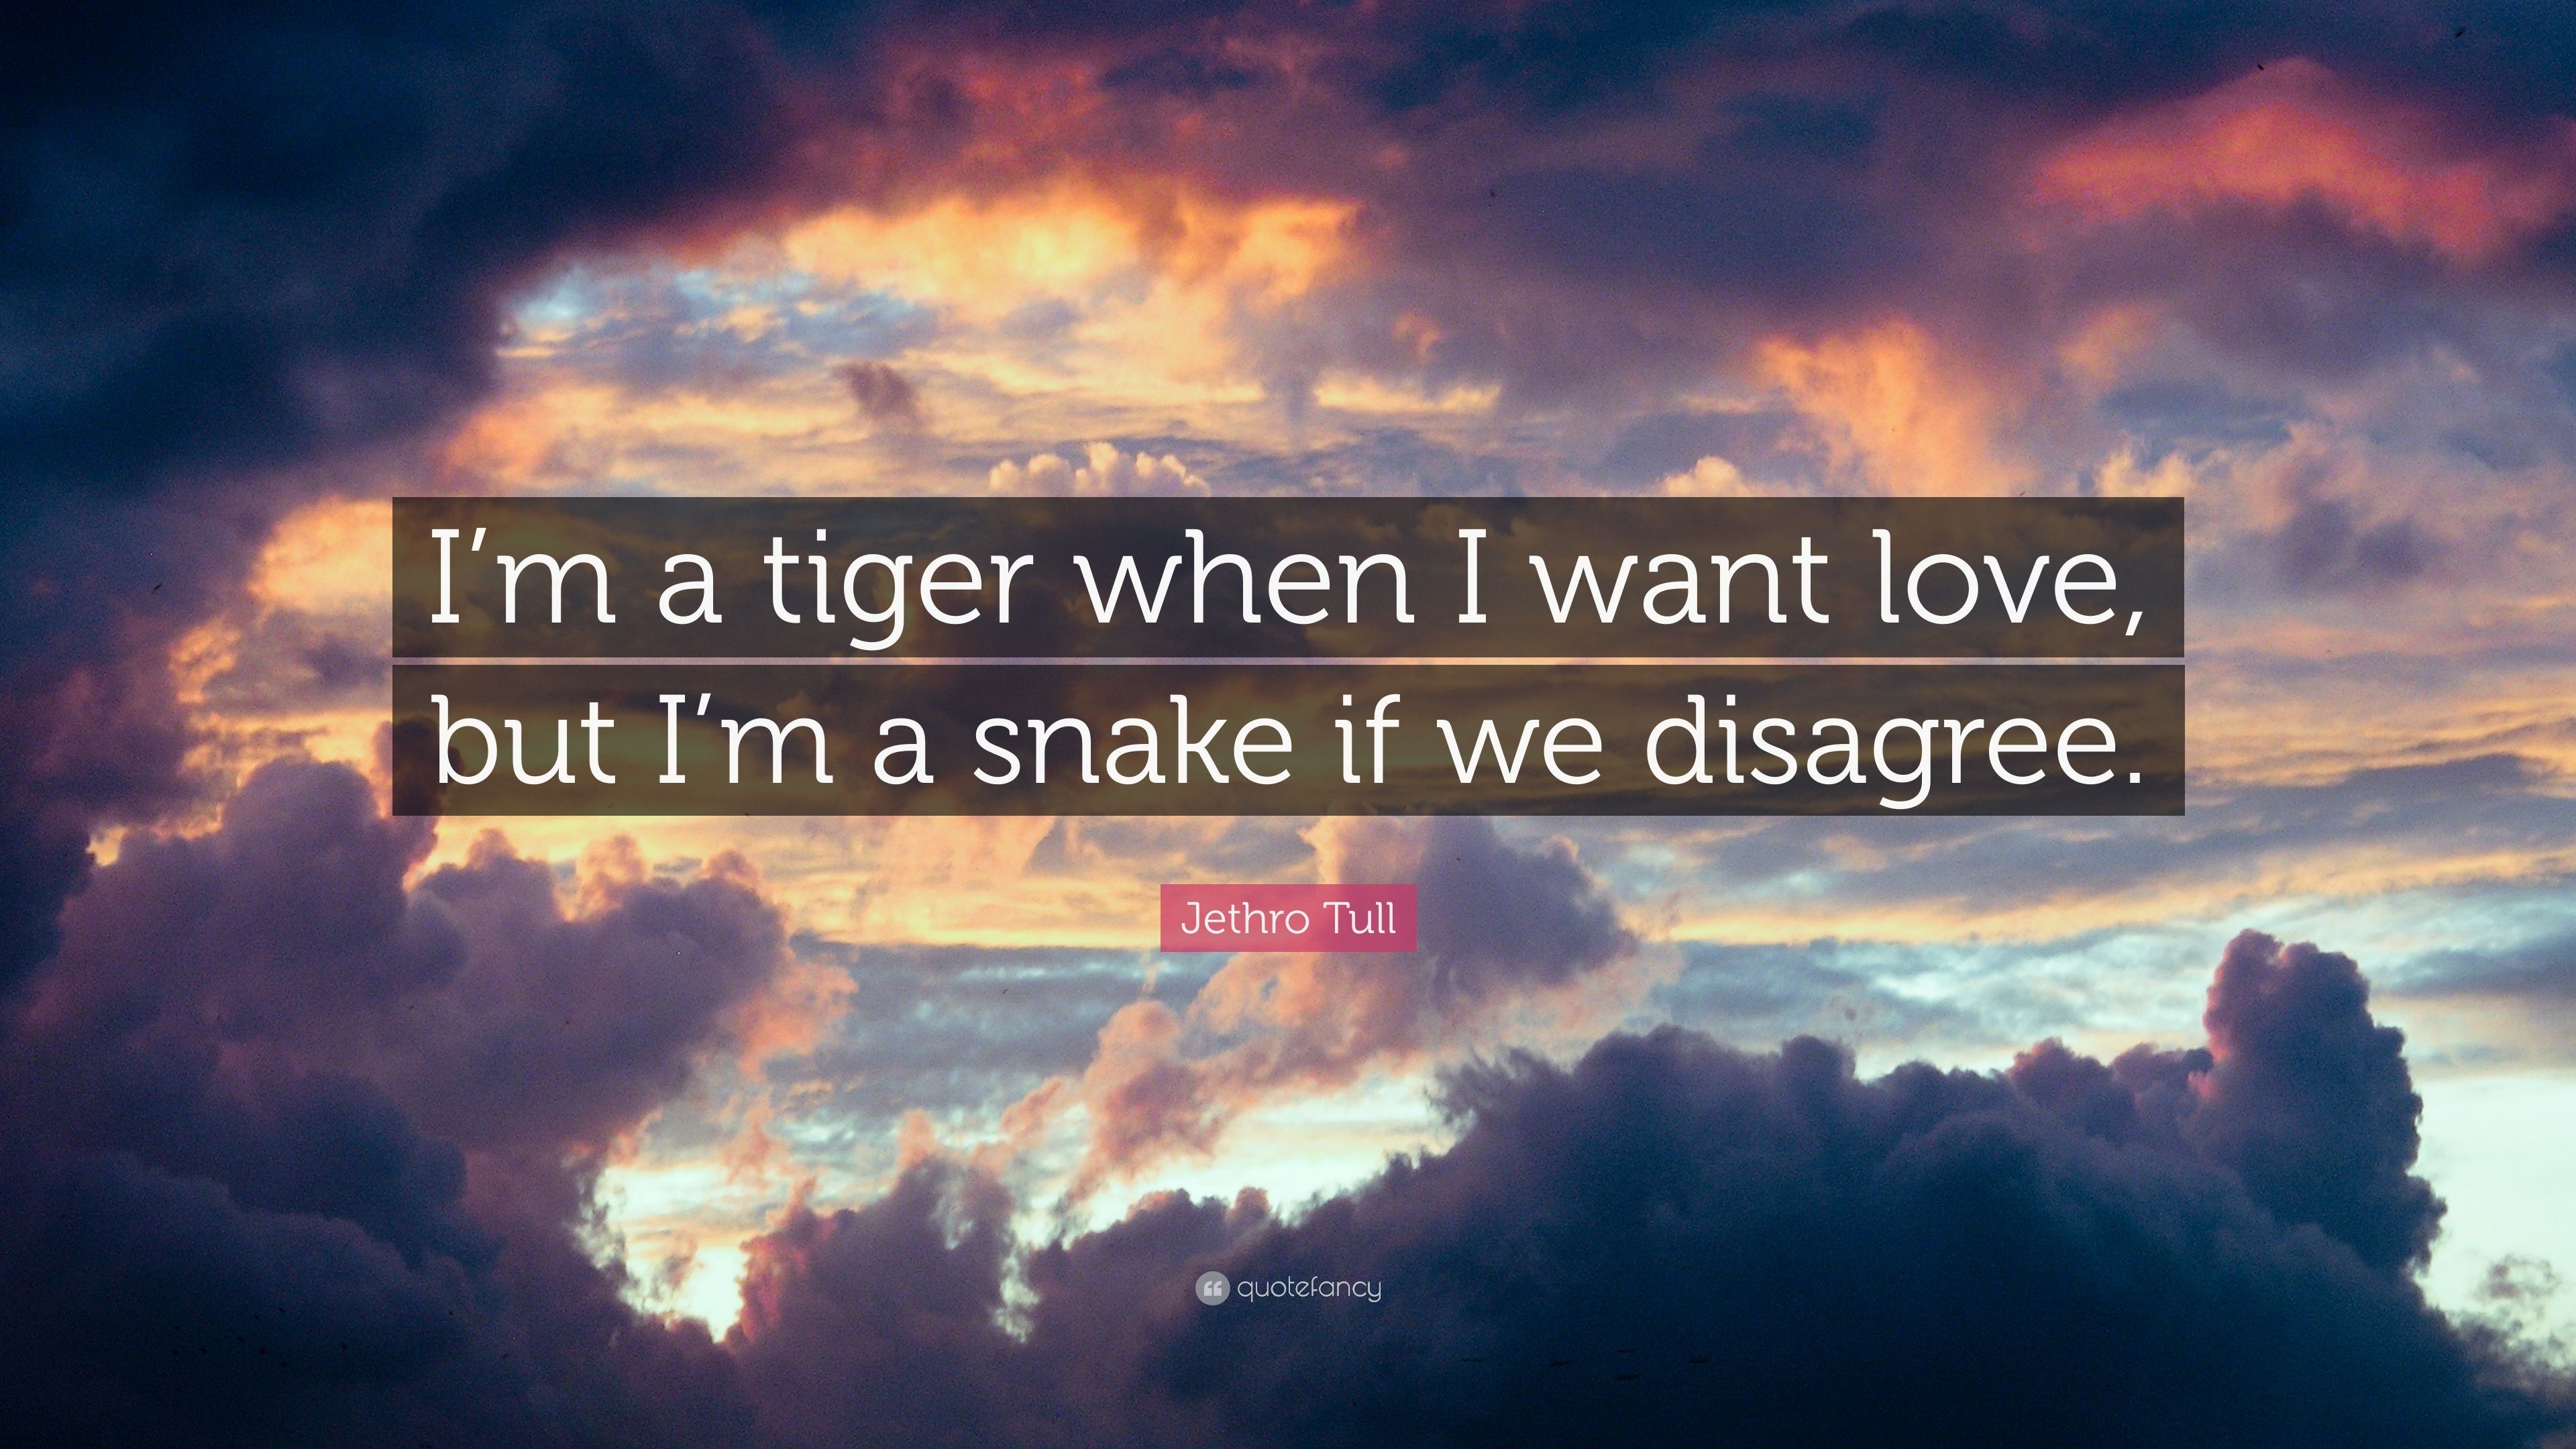 3840x2160 Jethro Tull Quote: “I'm a tiger when I want love, but